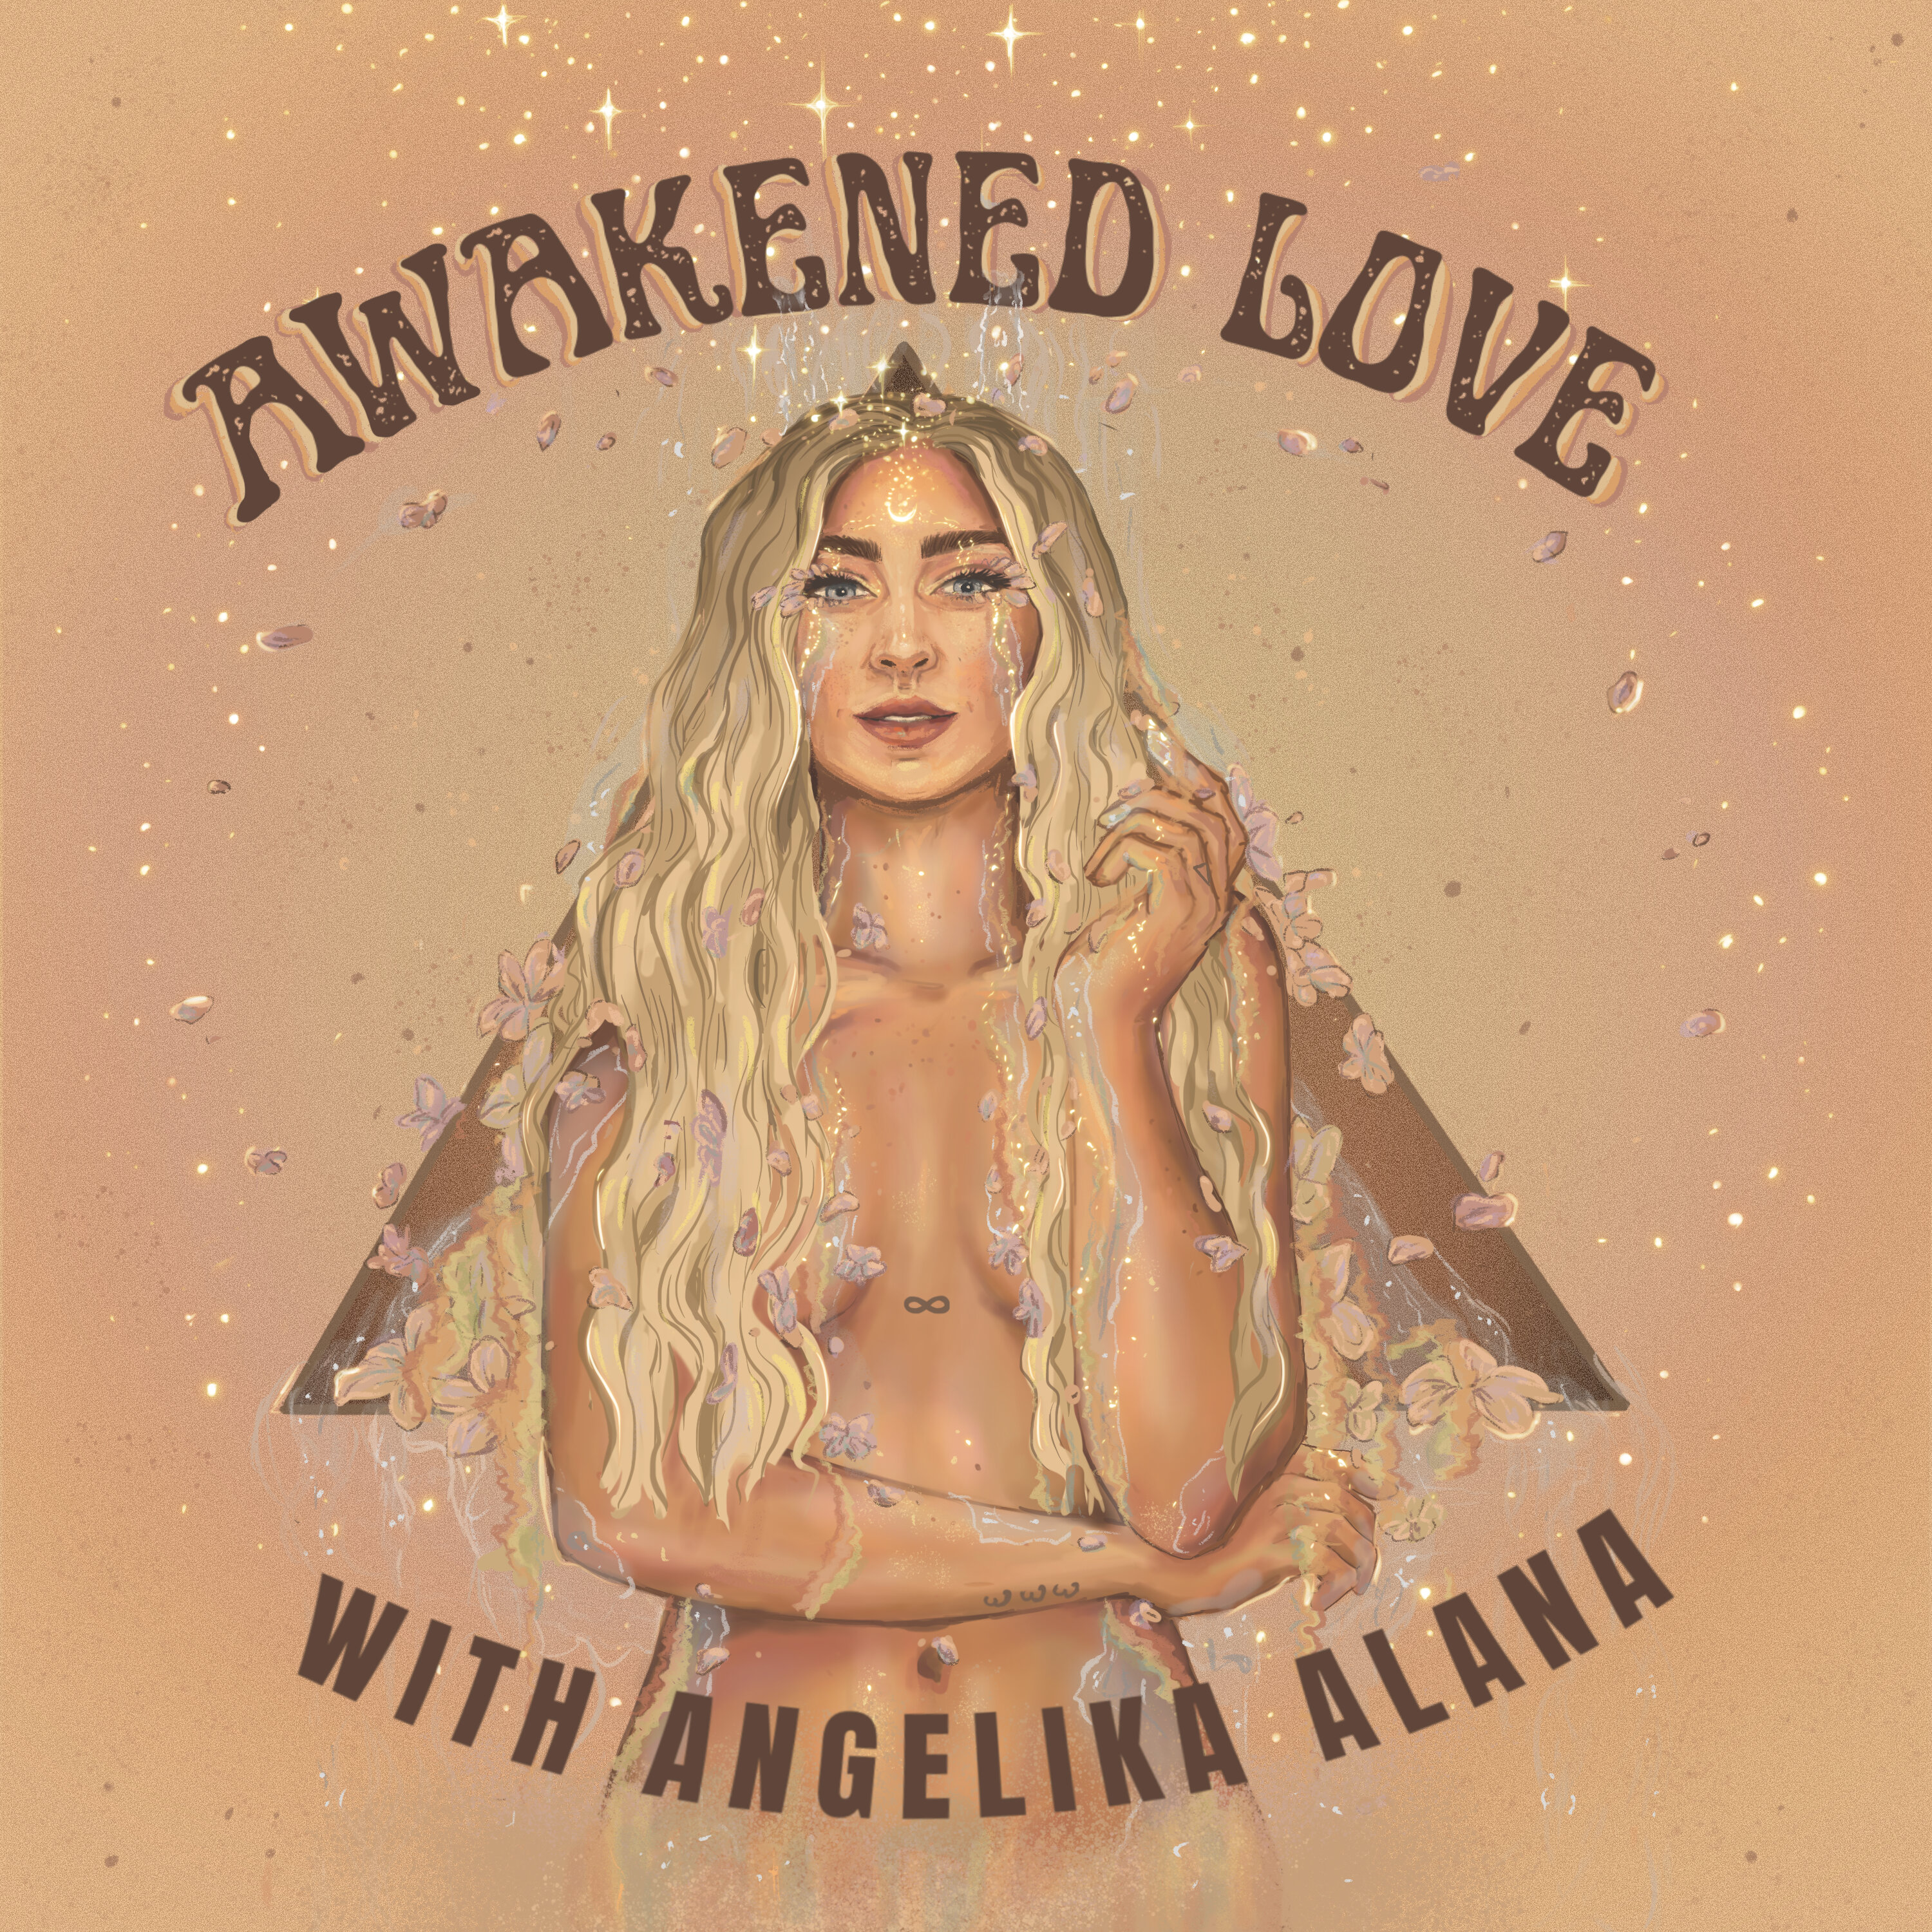 Sexual Seasons, Orgasmic Birthing, and Thriving at Any Age  - with Erika Alsborn | Awakened Love S2 EP 9 Image